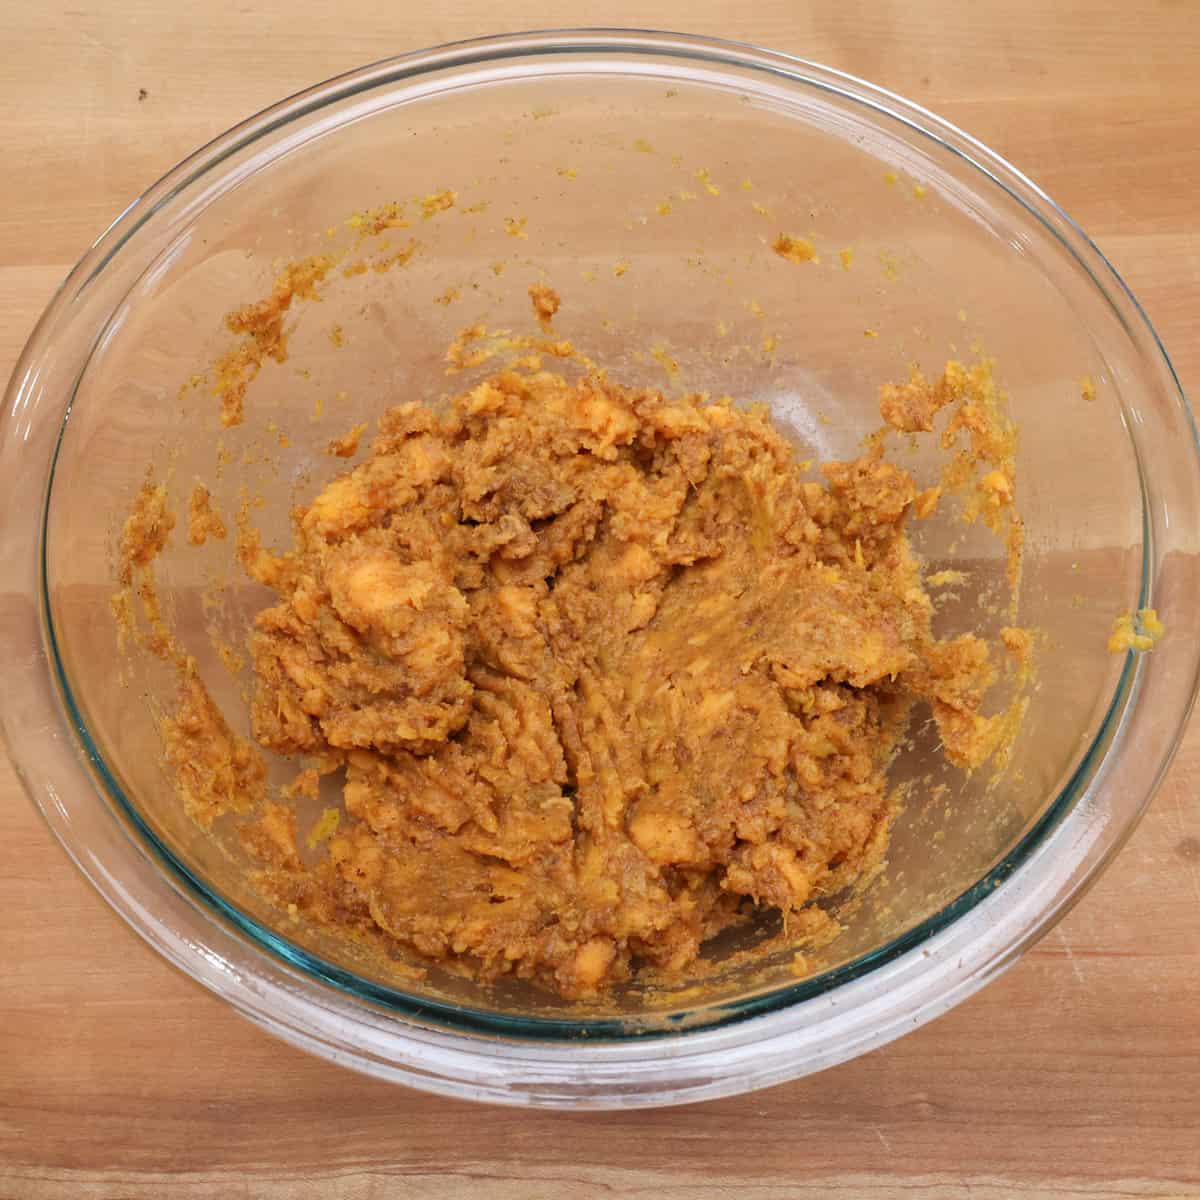 glass bowl with mashed sweet potatoes mixed with the dry ingredients.